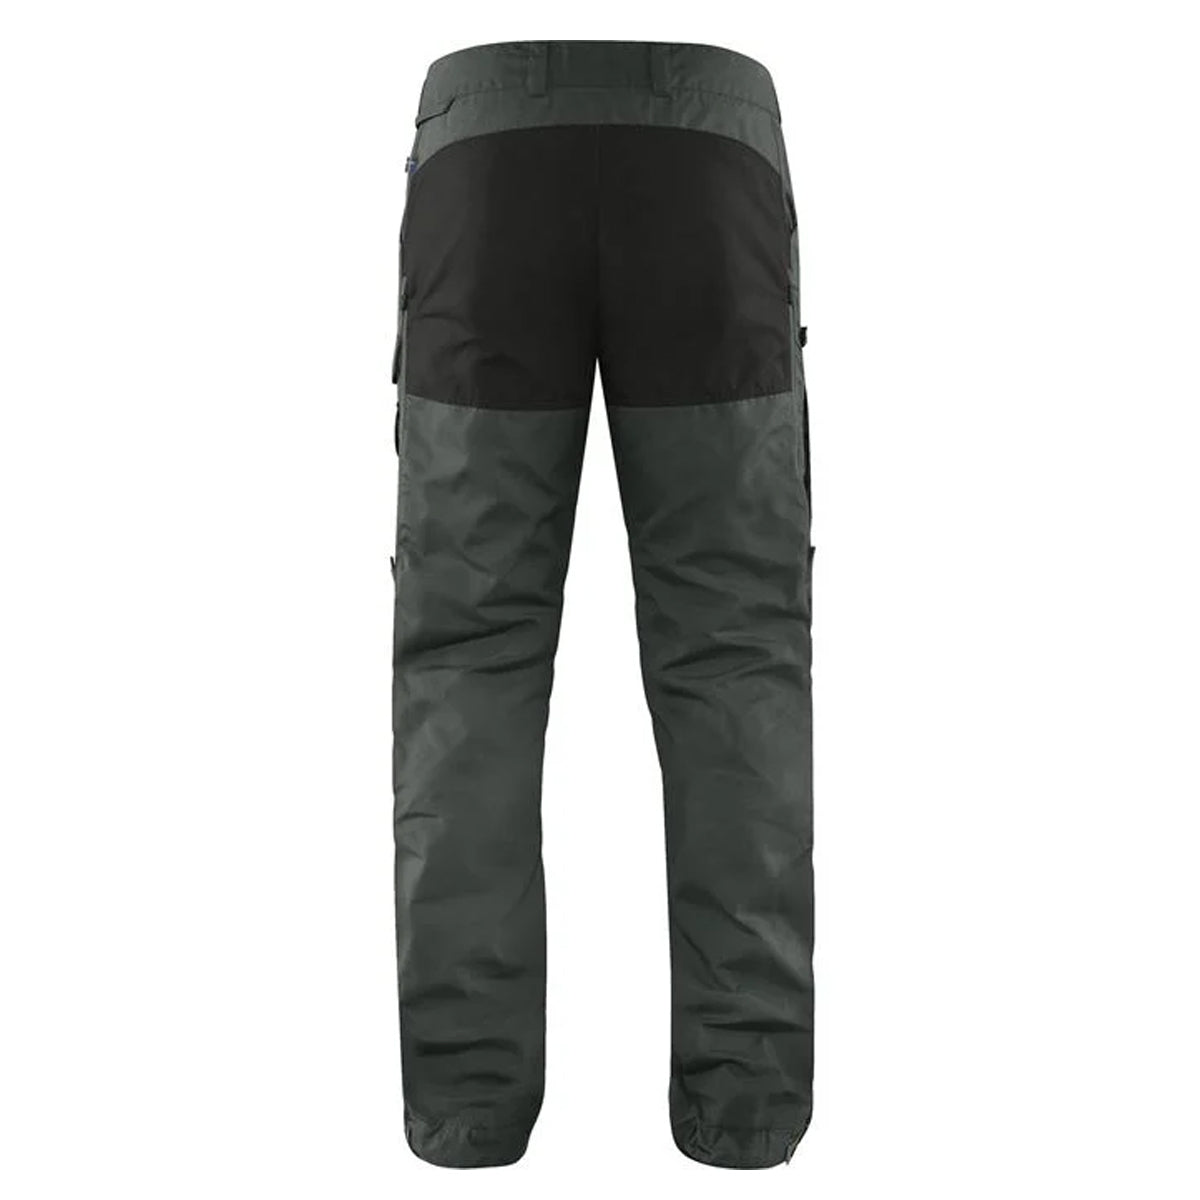 Fjallraven Vidda Pro Ventilated Trousers in  by GOHUNT | Fjallraven - GOHUNT Shop